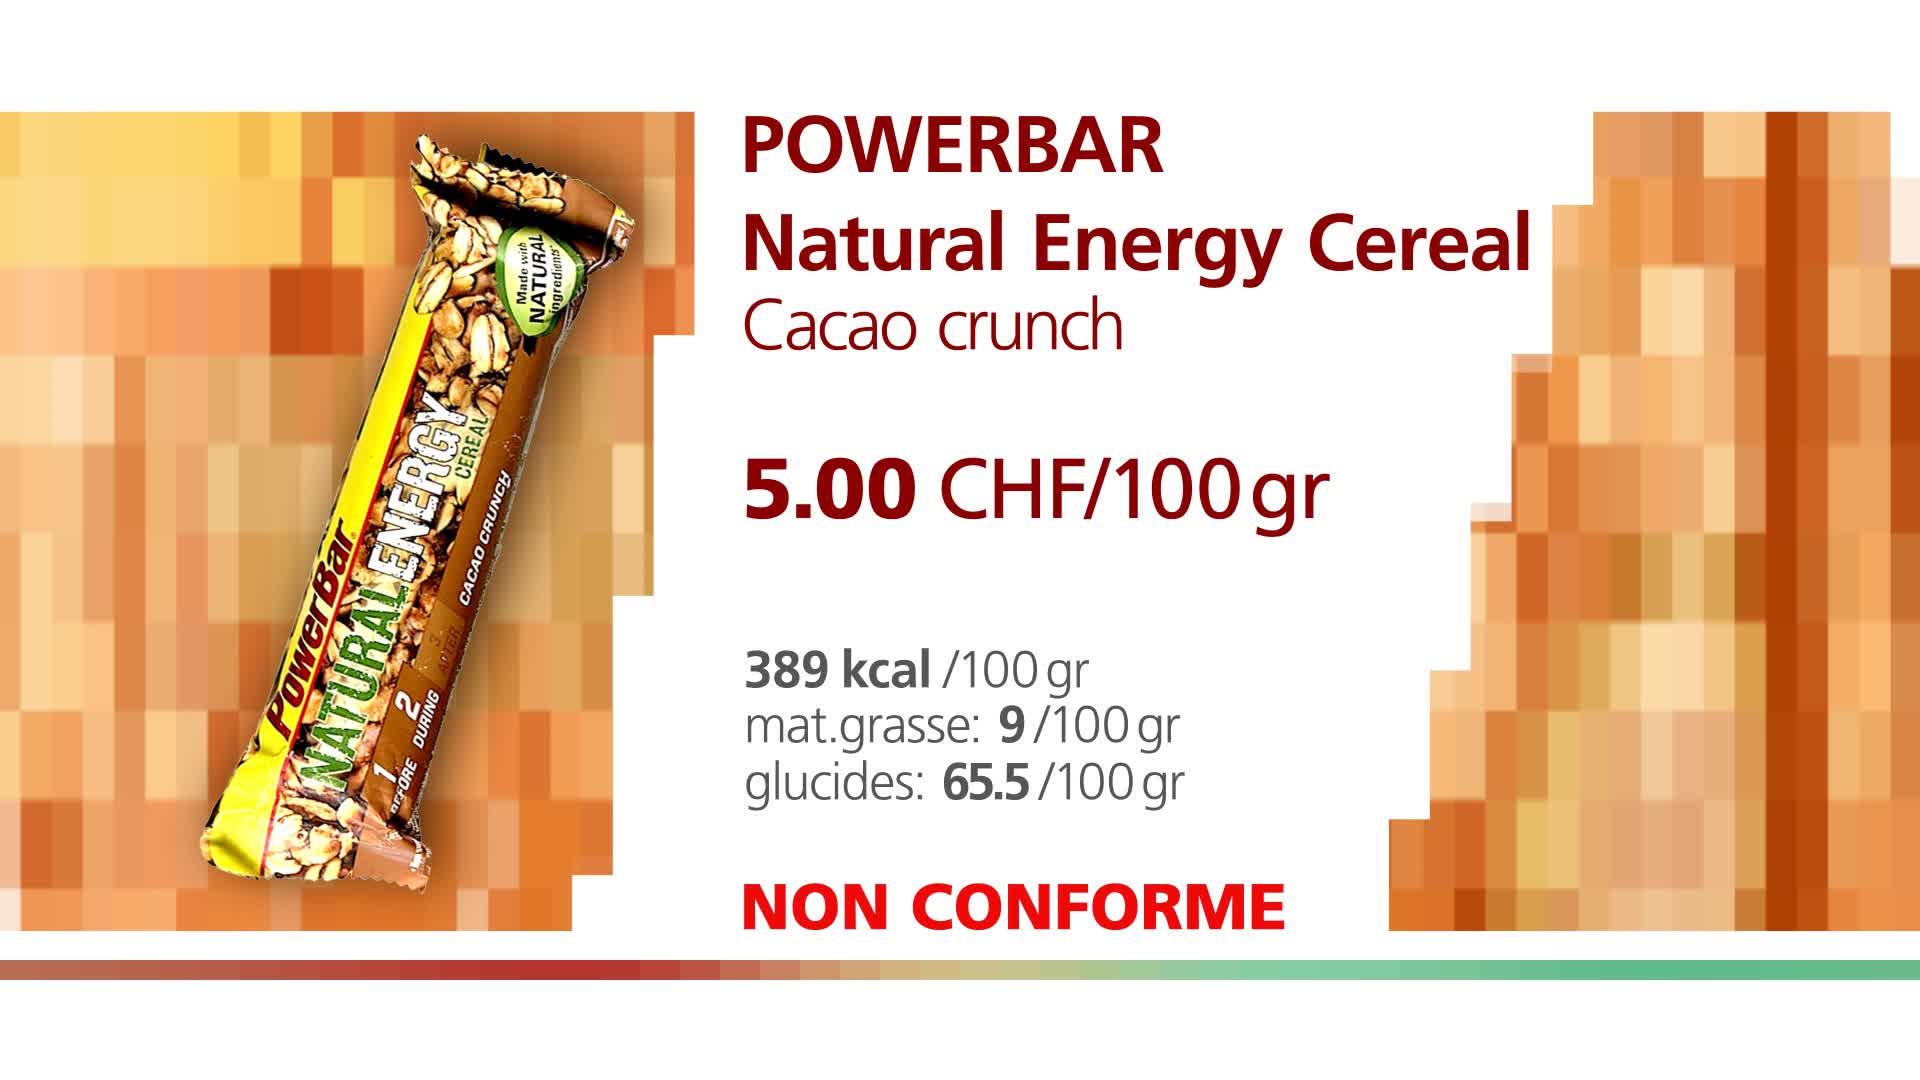 PowerBar Natural Energy Cereal Cacao crunch.